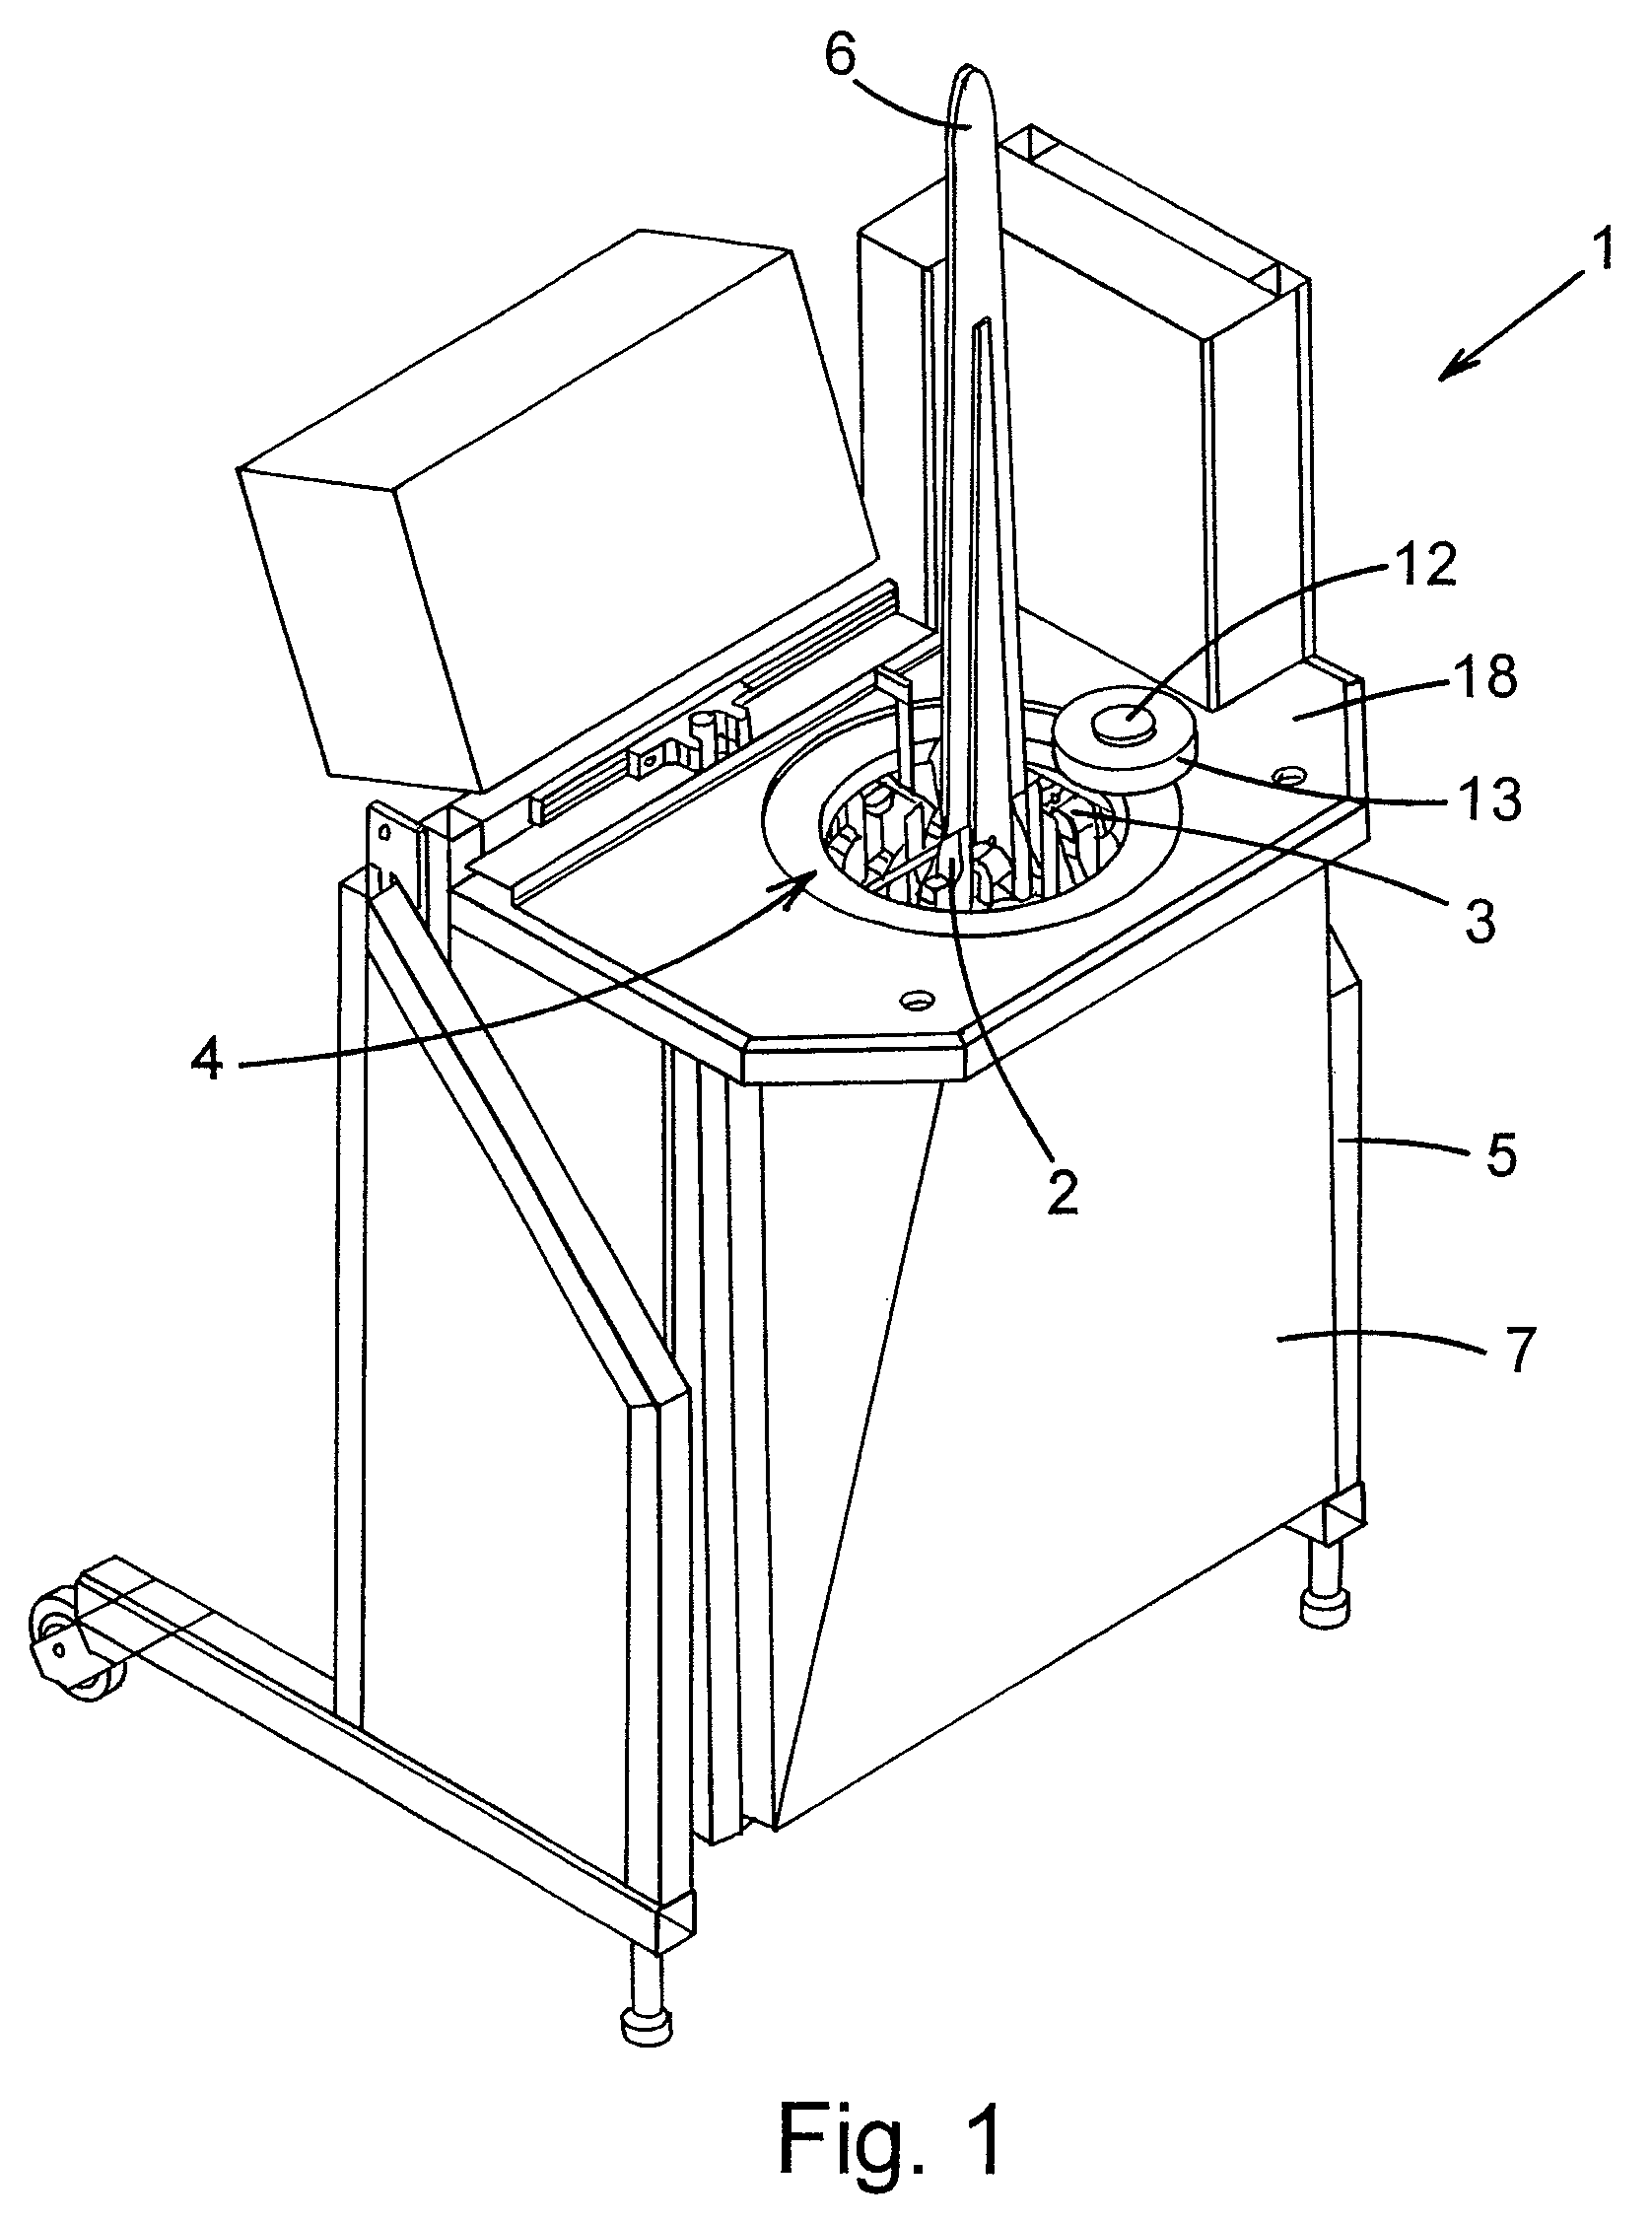 Method and apparatus for fastening fur on a pelting board and winding material therefor